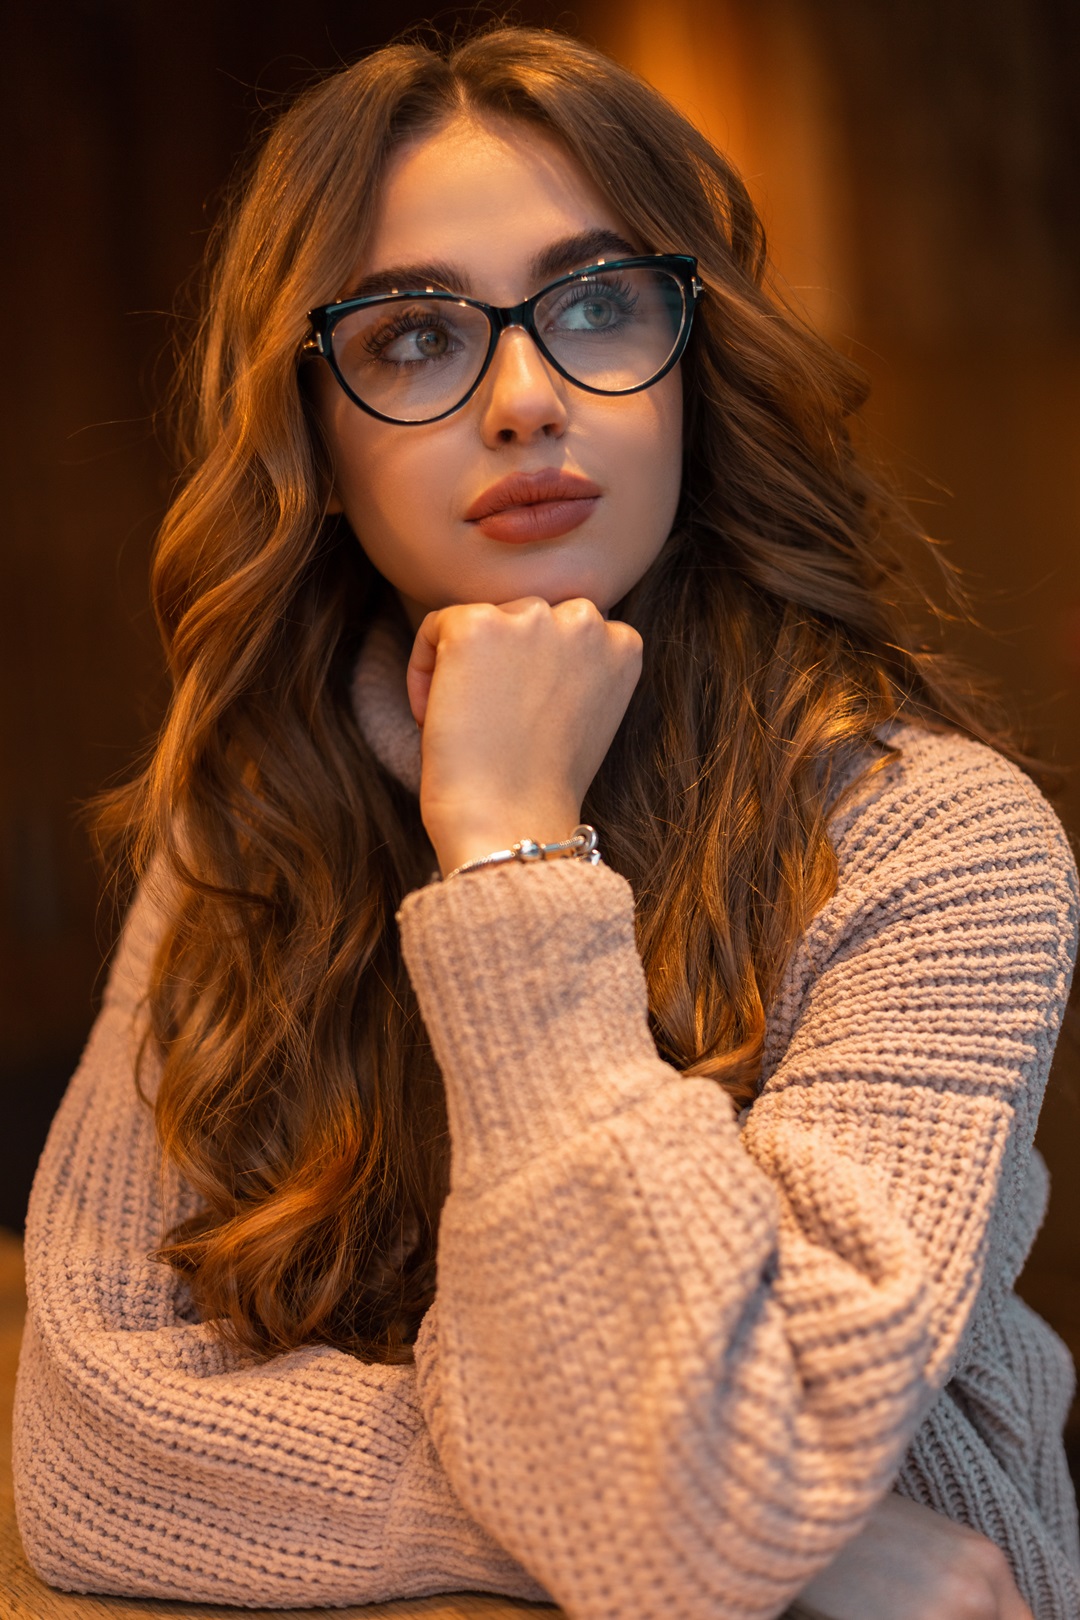 Indoors portrait of a beautiful stylish woman with trendy glasses and curly hairstyle in a fashion beige knitted vintage sweater sits in cafe